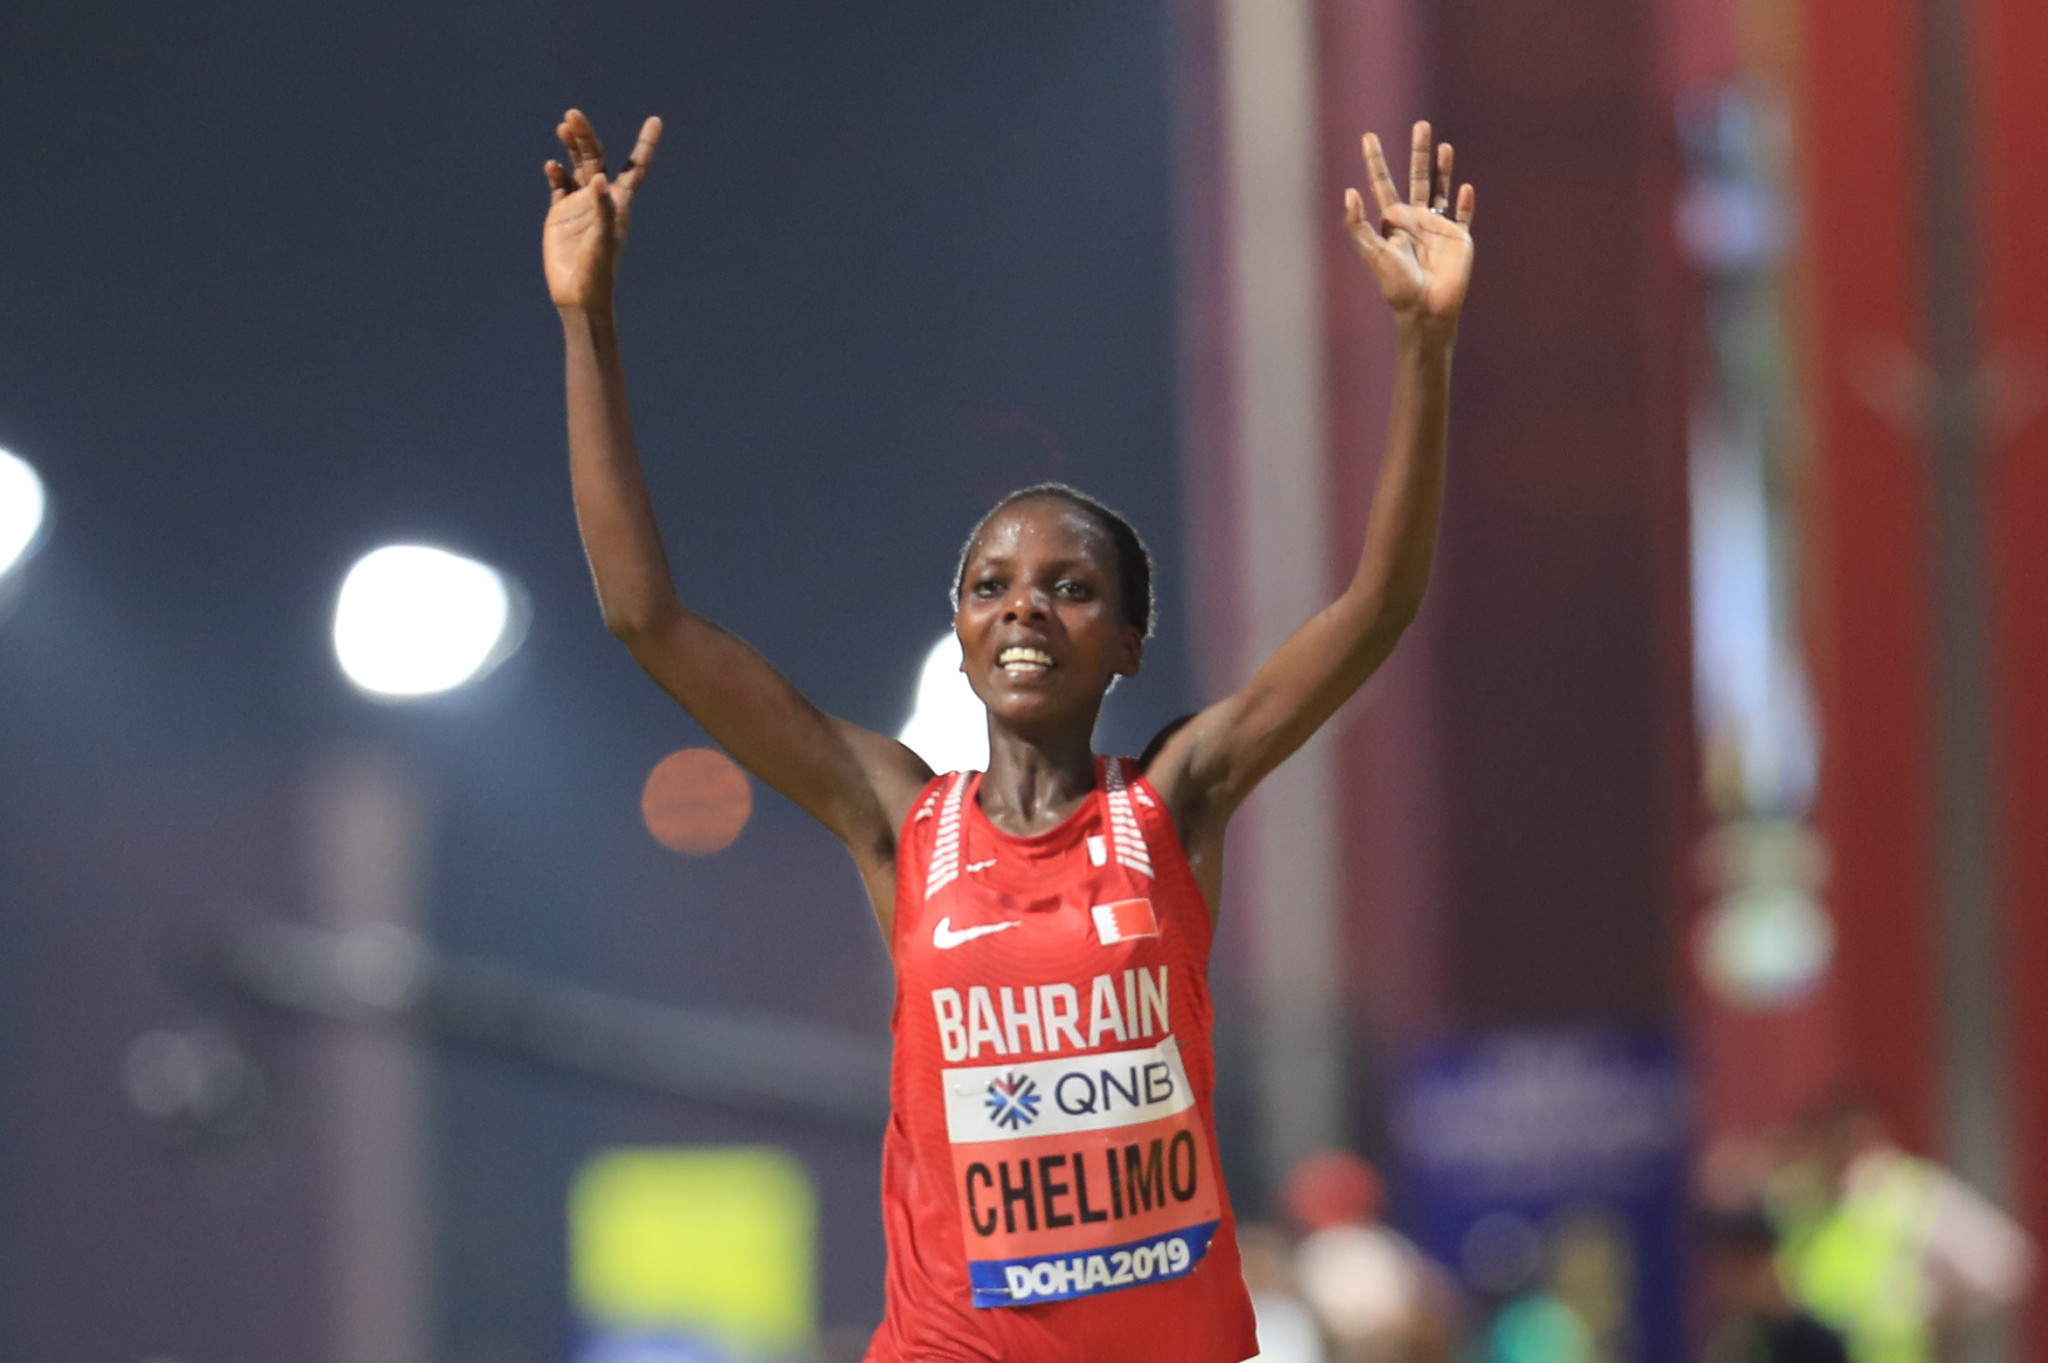 Bahrain's 2017 IAAF World Championship gold medallist Rose Chelimo's will be among the top names in the women's race at the Boston Marathon ©Getty Images